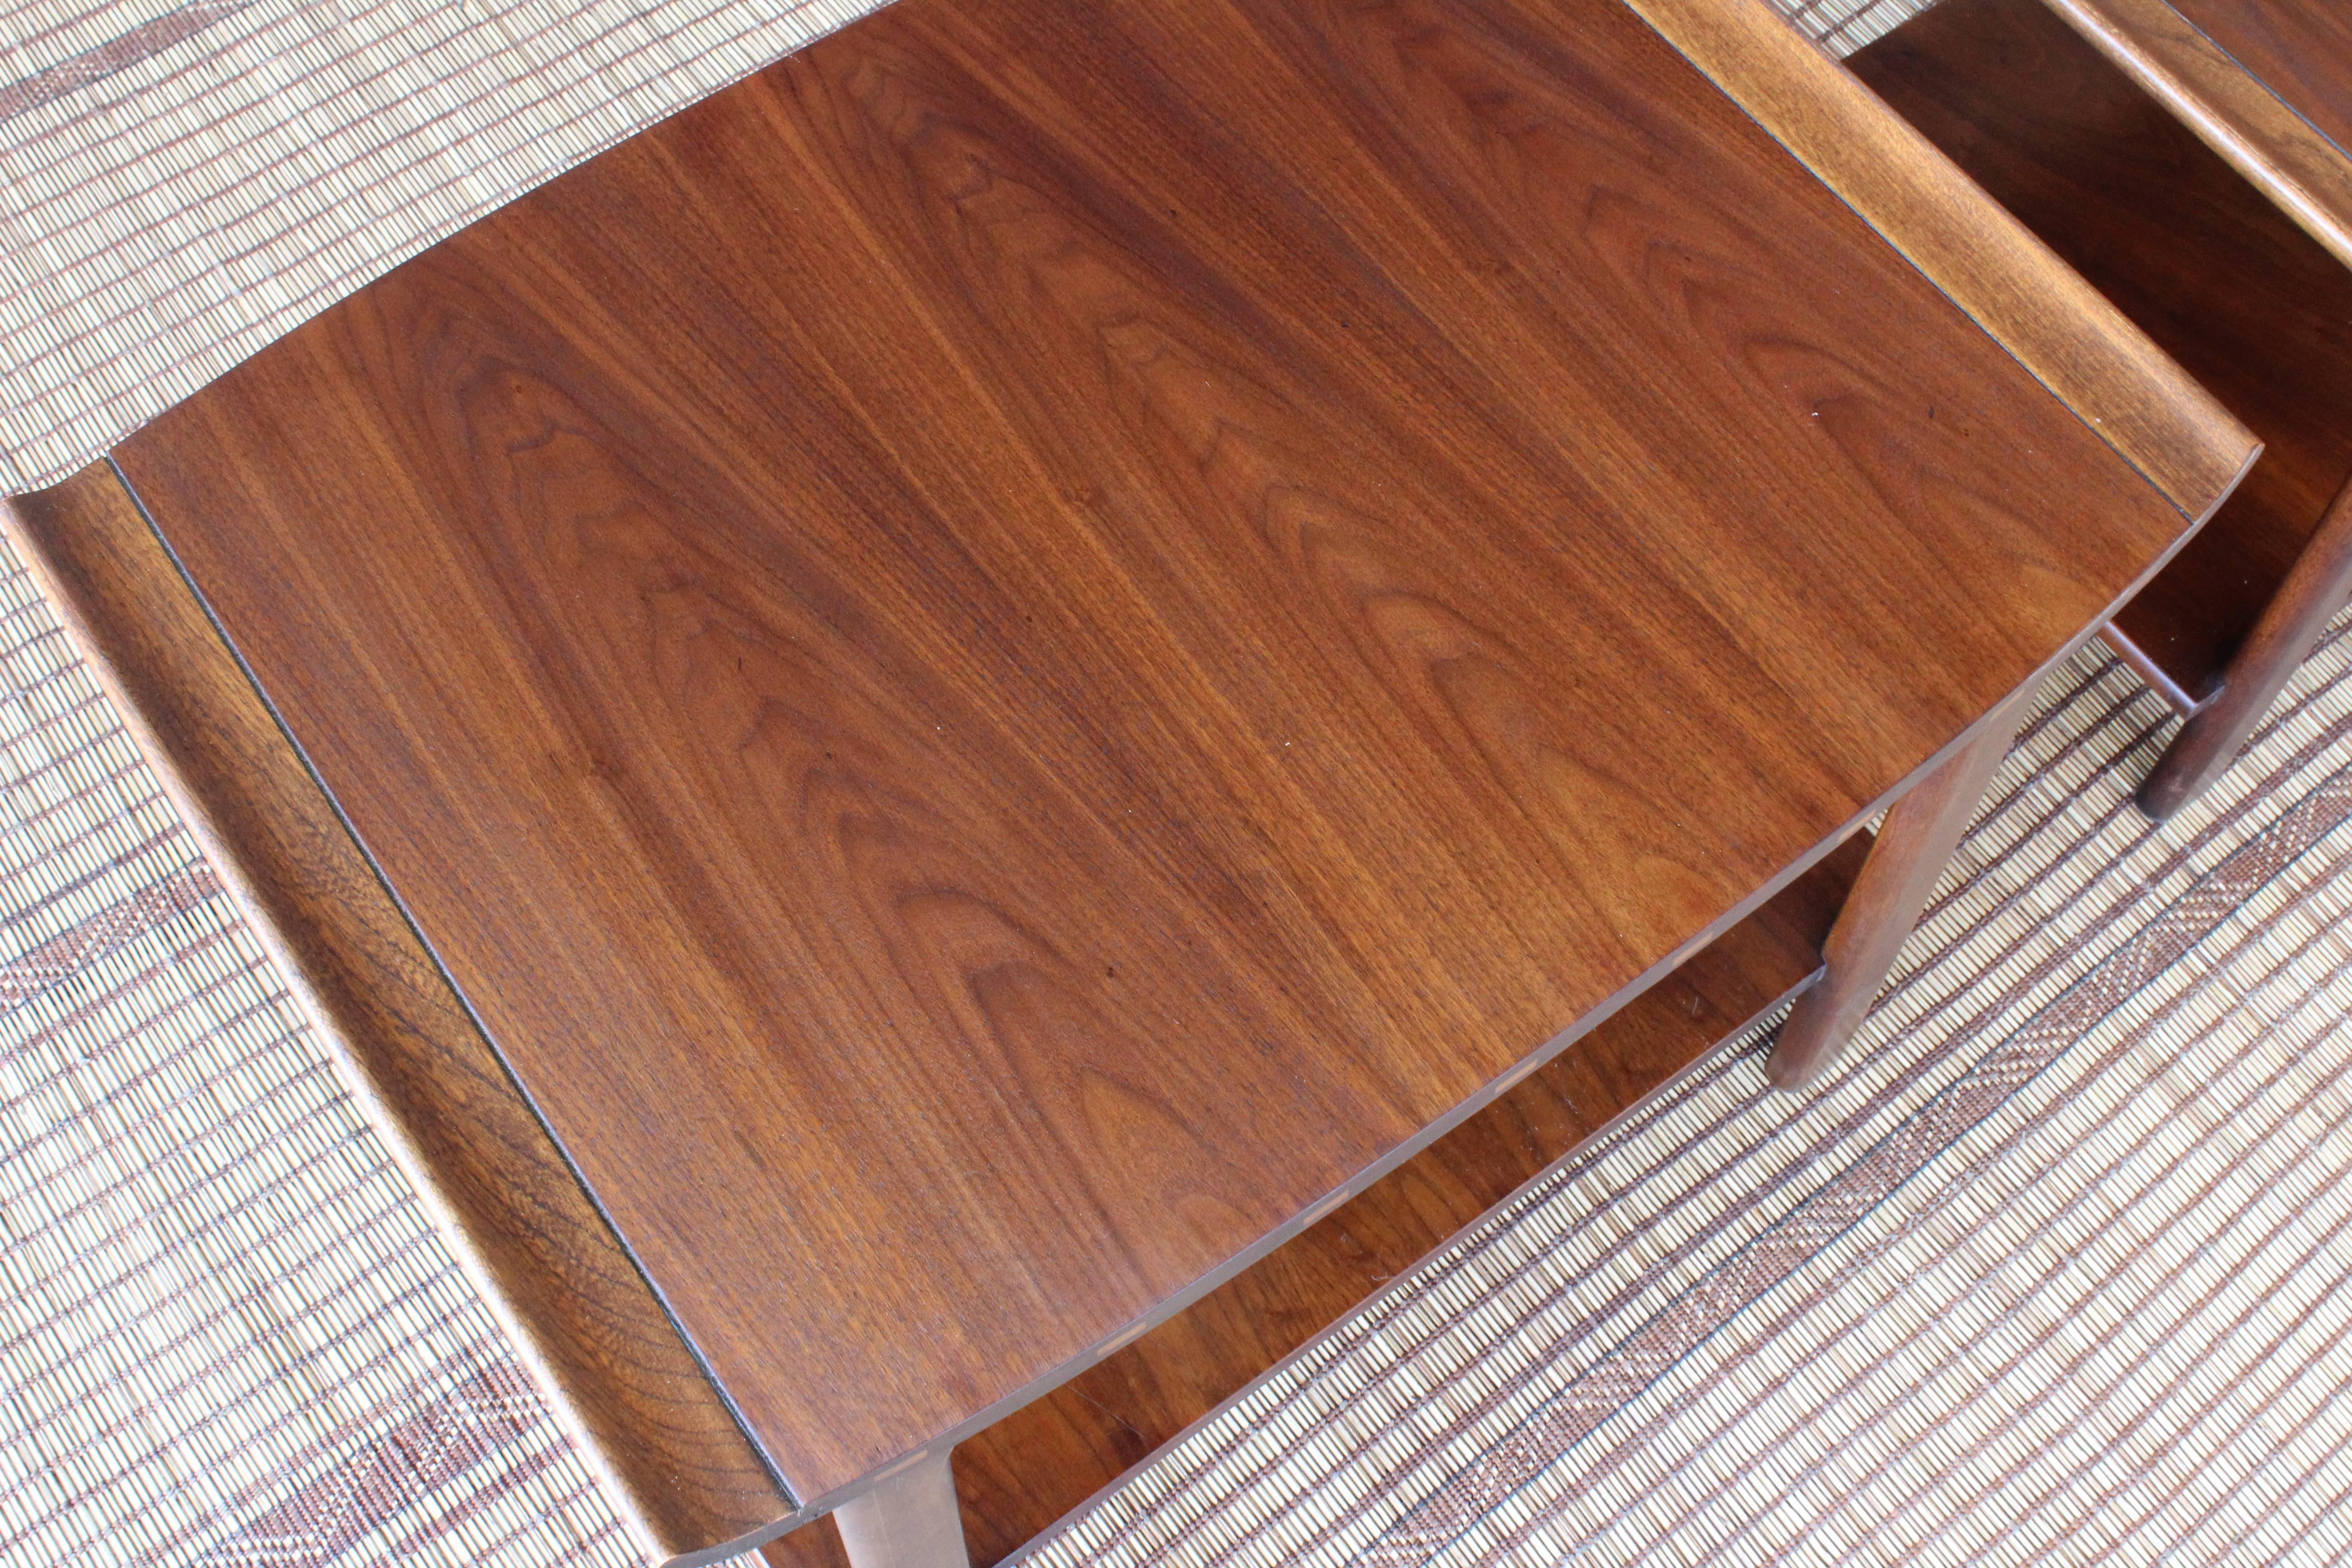 1960s end tables